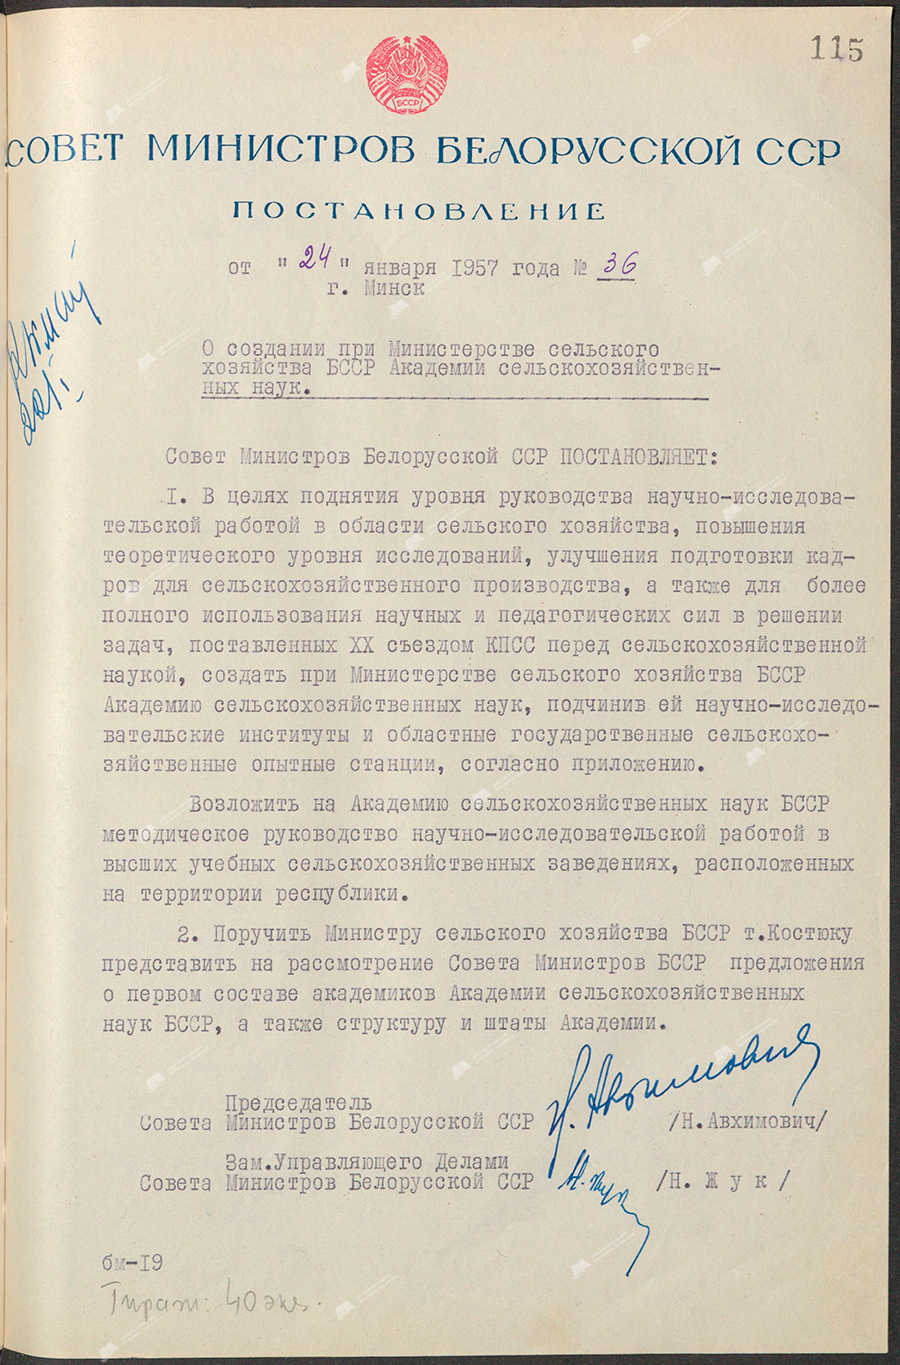 Resolution No. 36 of the Council of Ministers of the Byelorussian SSR «On the creation of the Academy of Agricultural Sciences under the Ministry of Agriculture of the BSSR»-с. 0